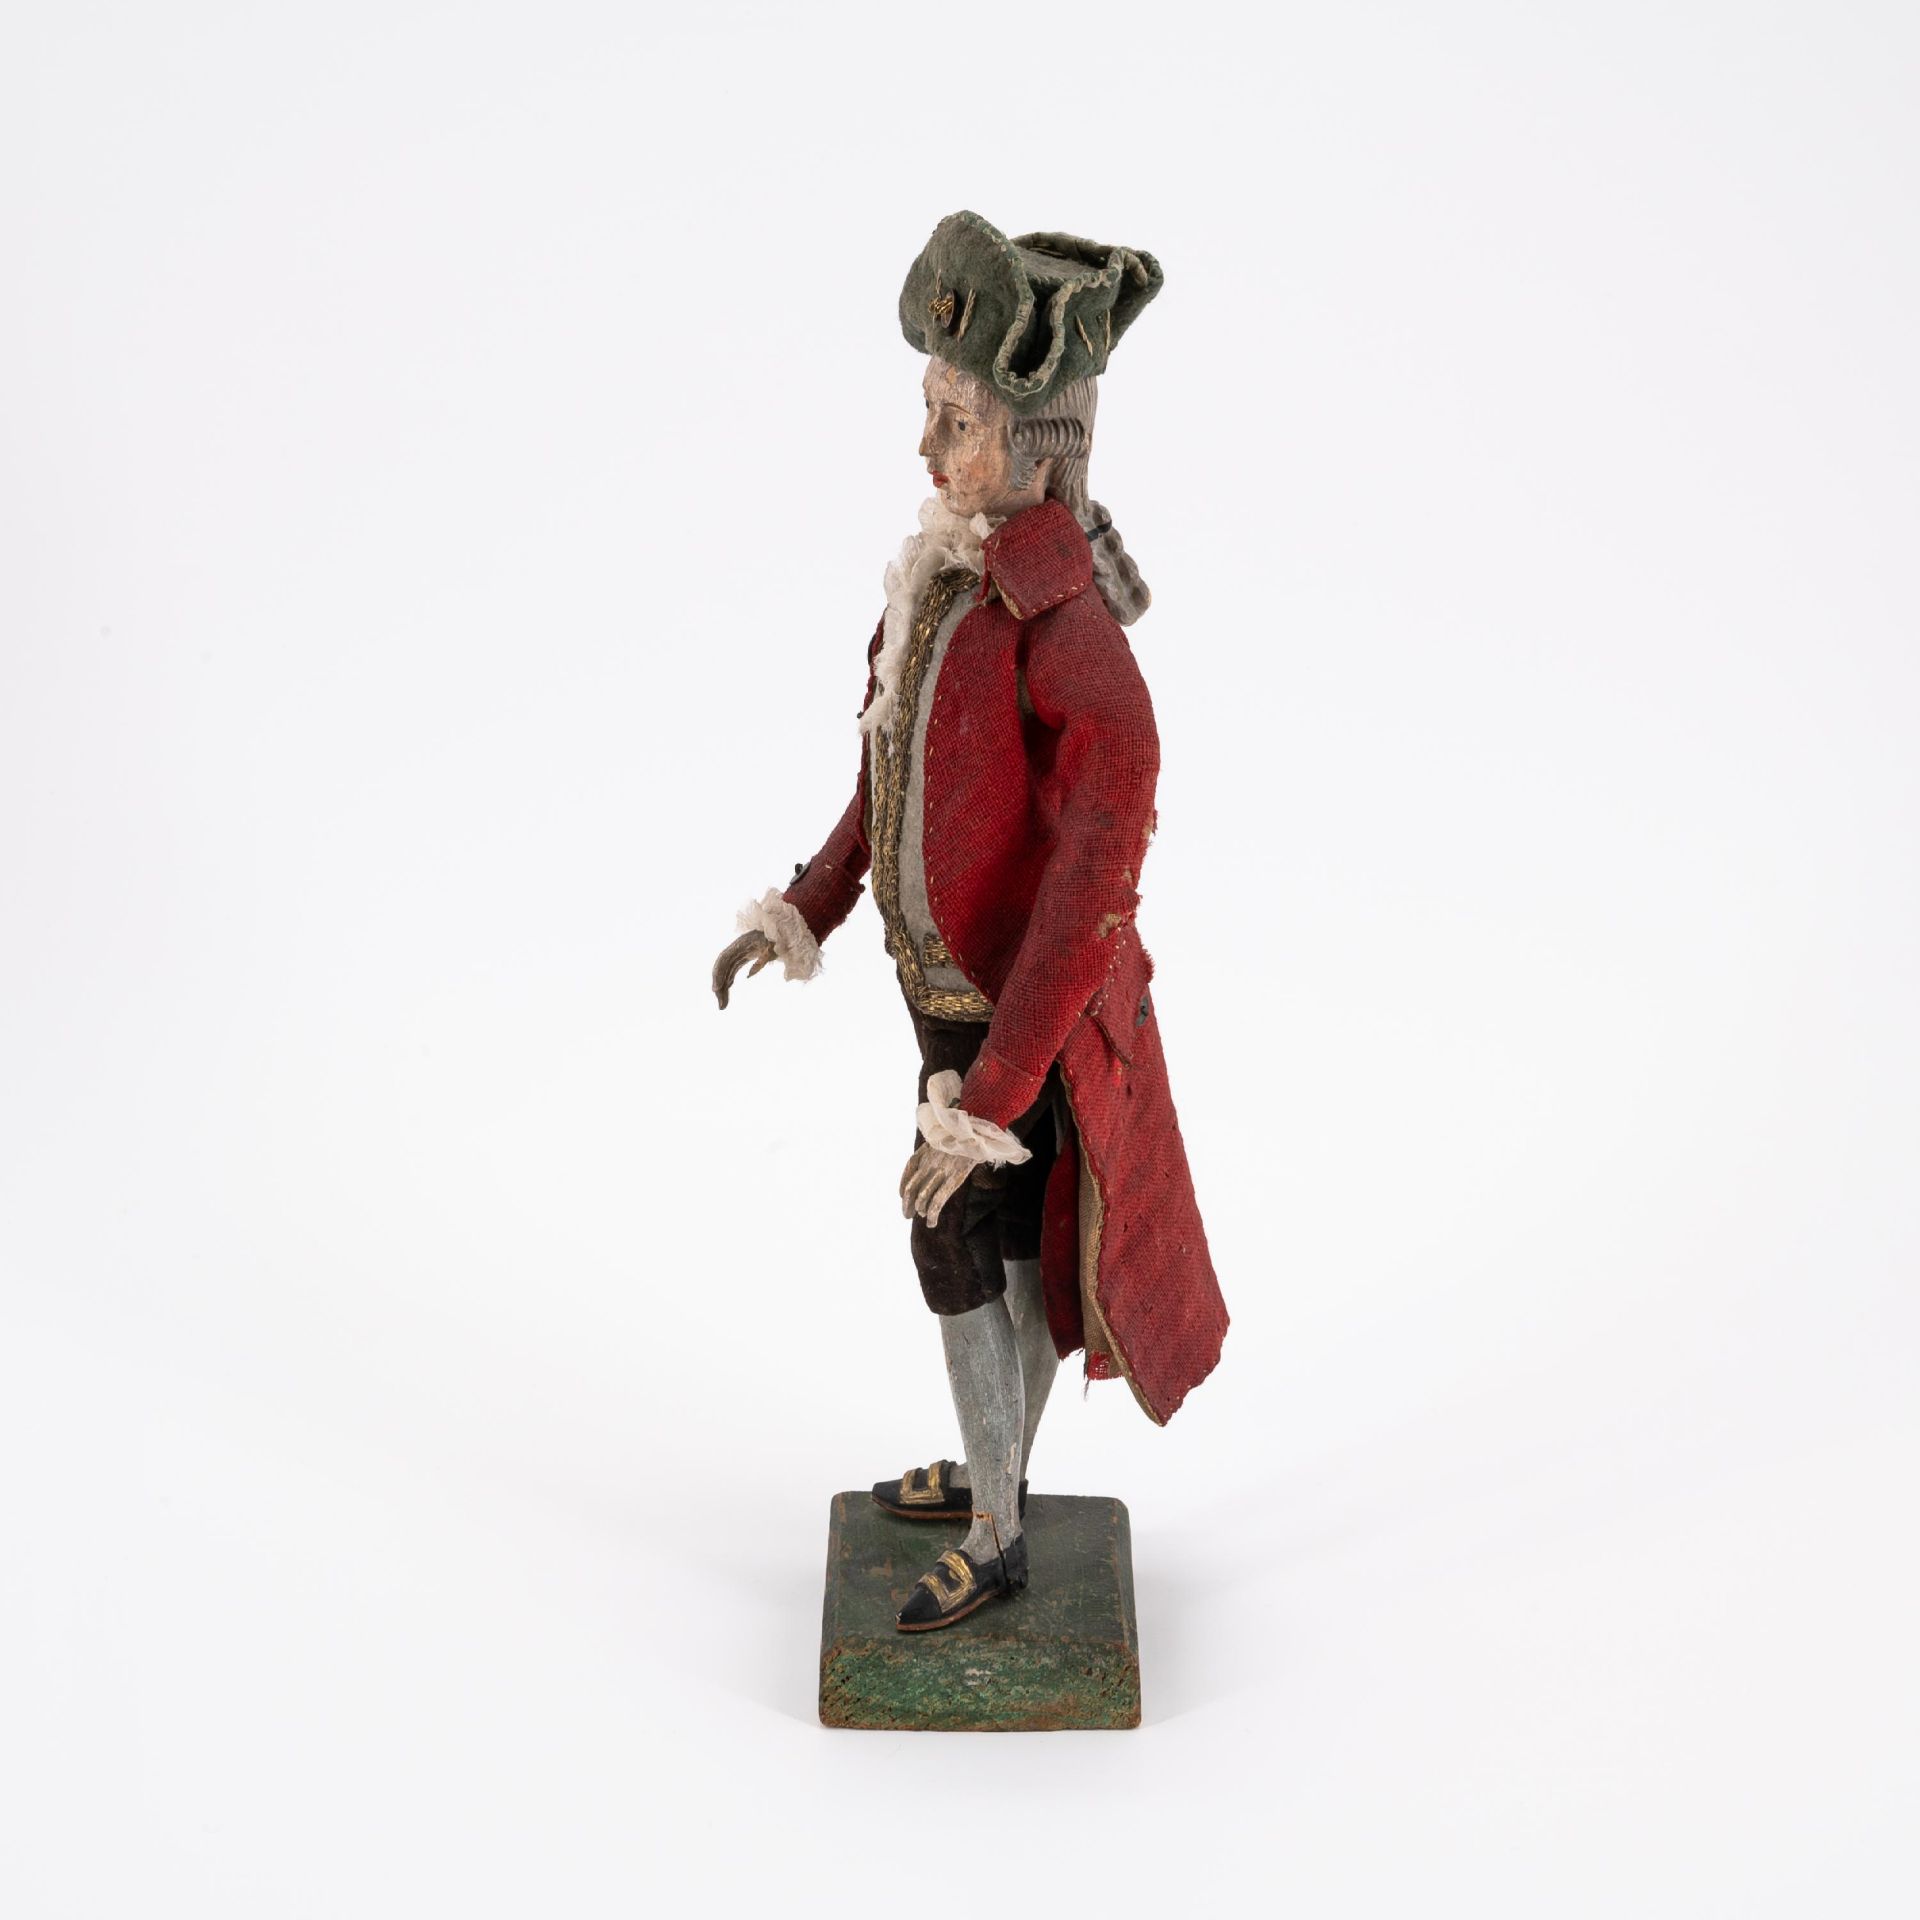 MODEL FIGURINE OF A GALLANT GENTLEMAN MADE OF WOOD, WOOL, VELVET, SILK, GOLDEN TRIMMINGS AND SILVER - Image 2 of 5